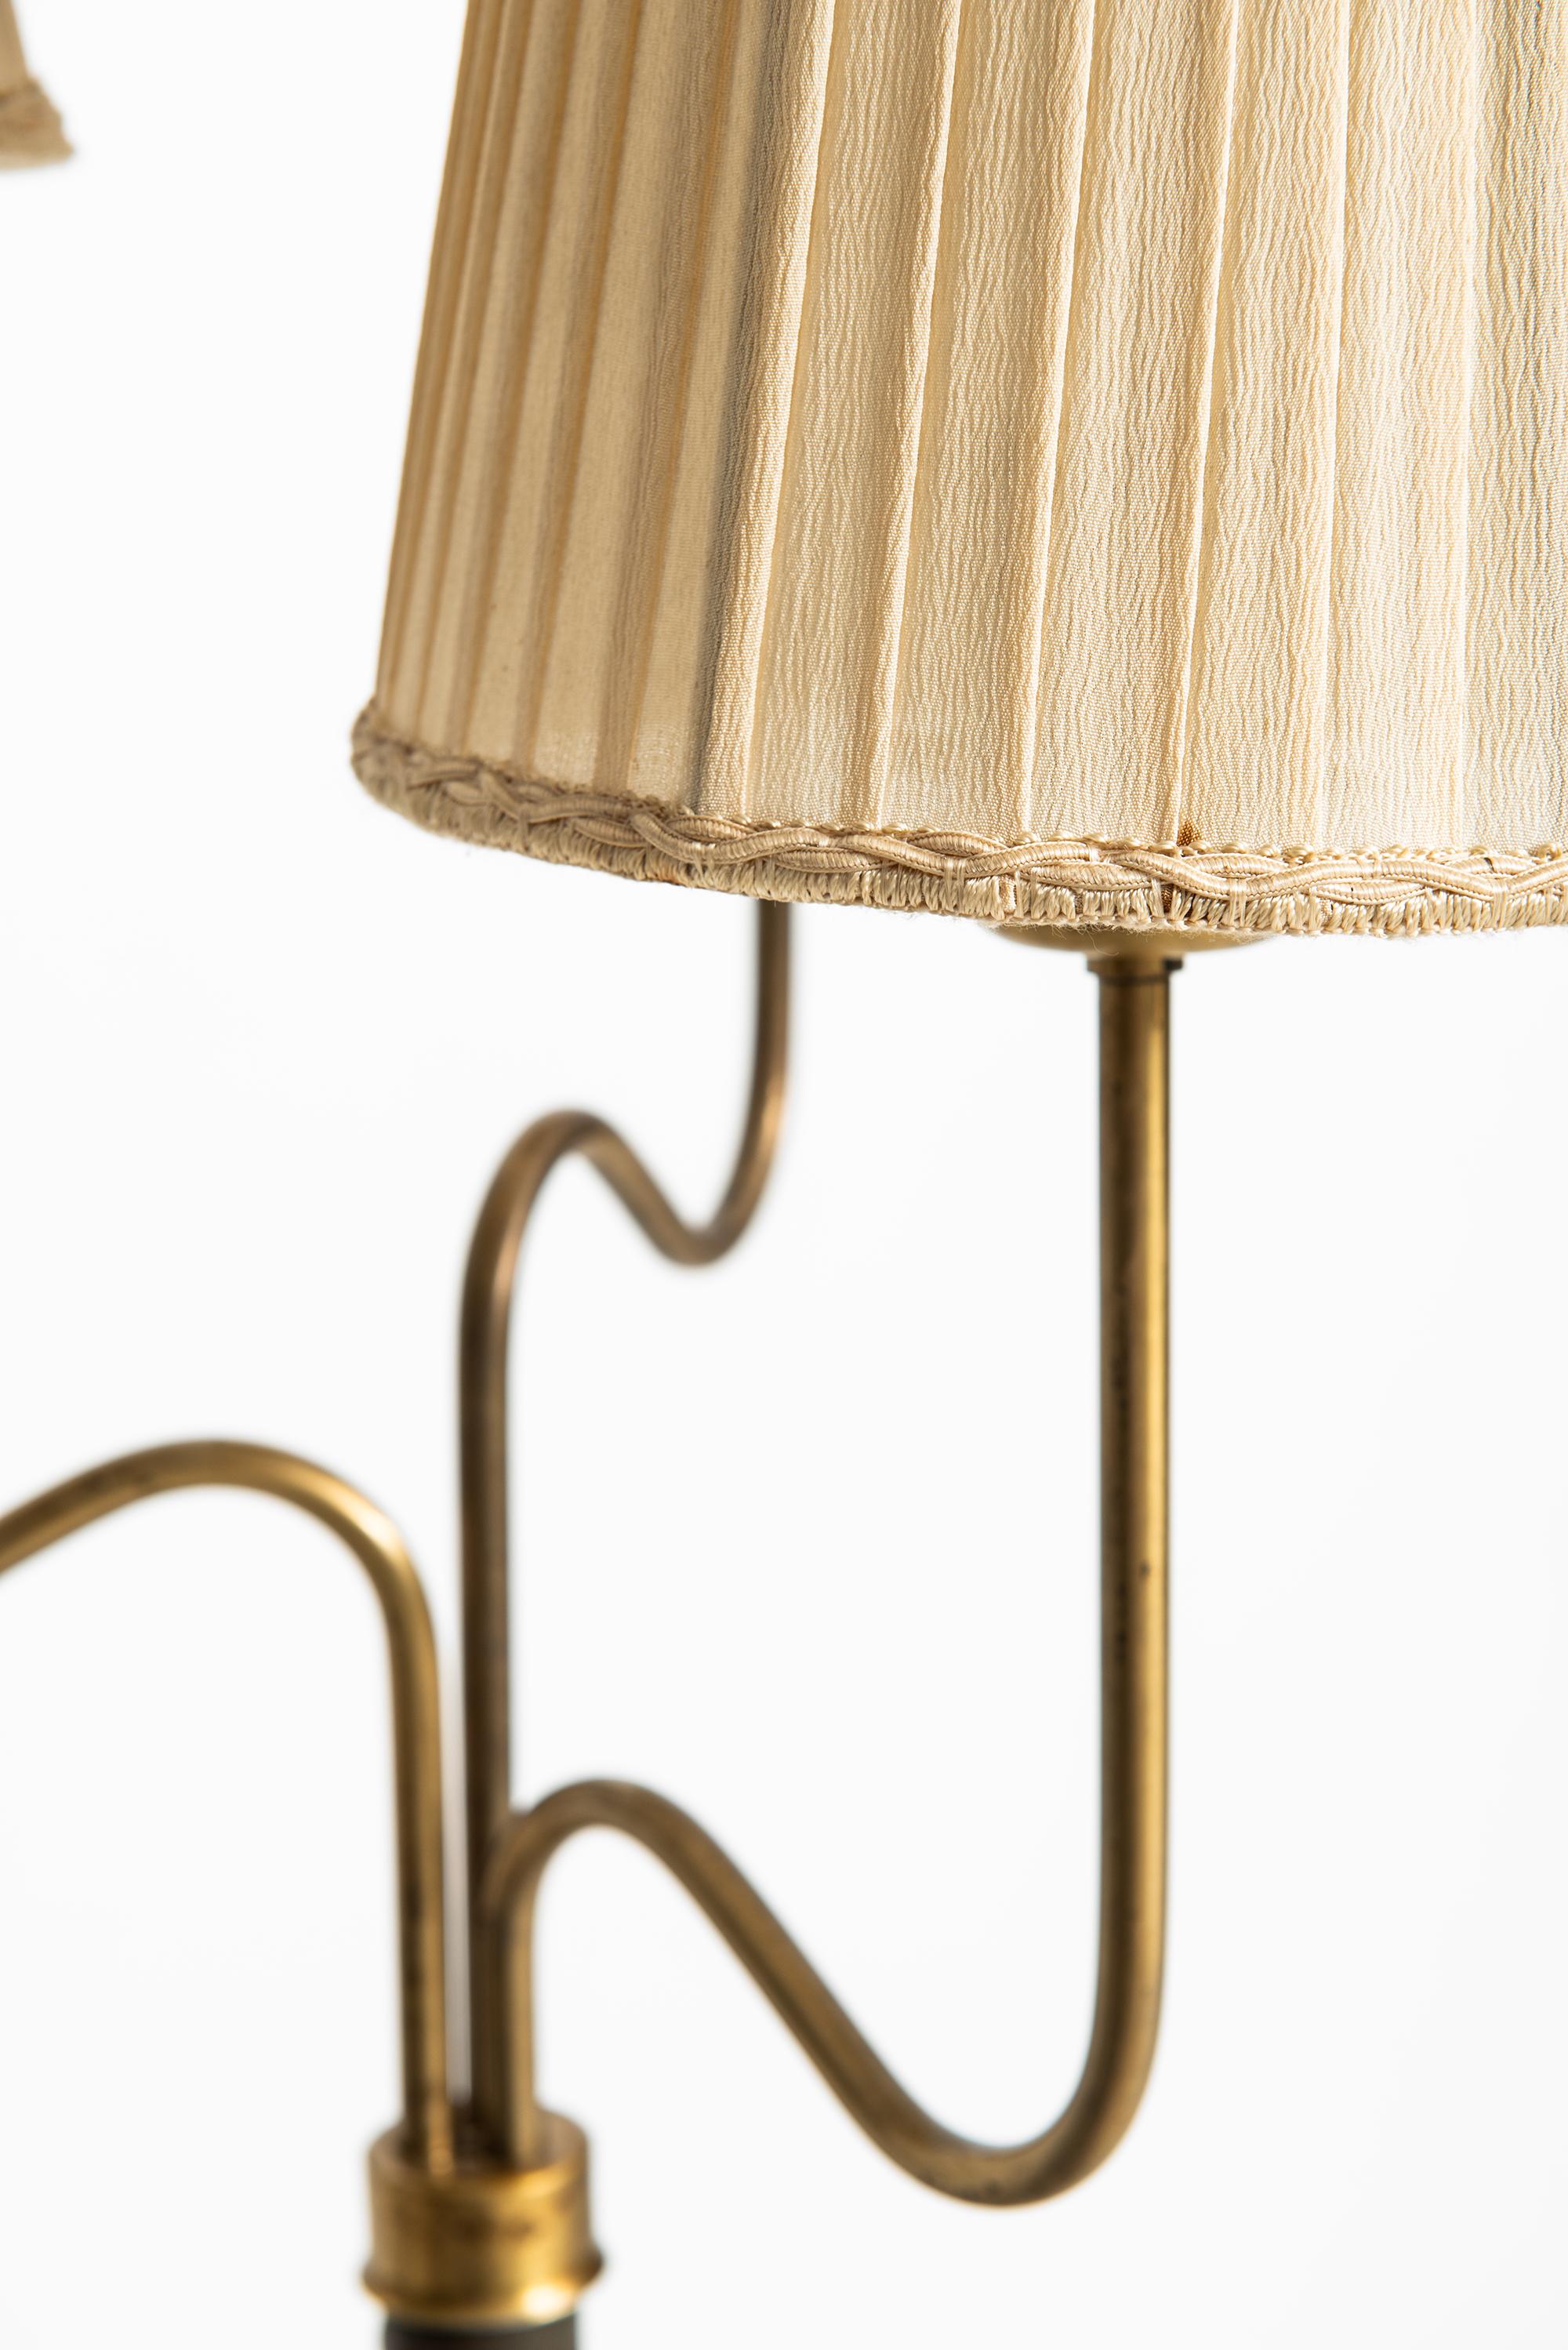 Mid-20th Century Hans Bergström Floor Lamp with 3 Arms Produced by ASEA in Sweden